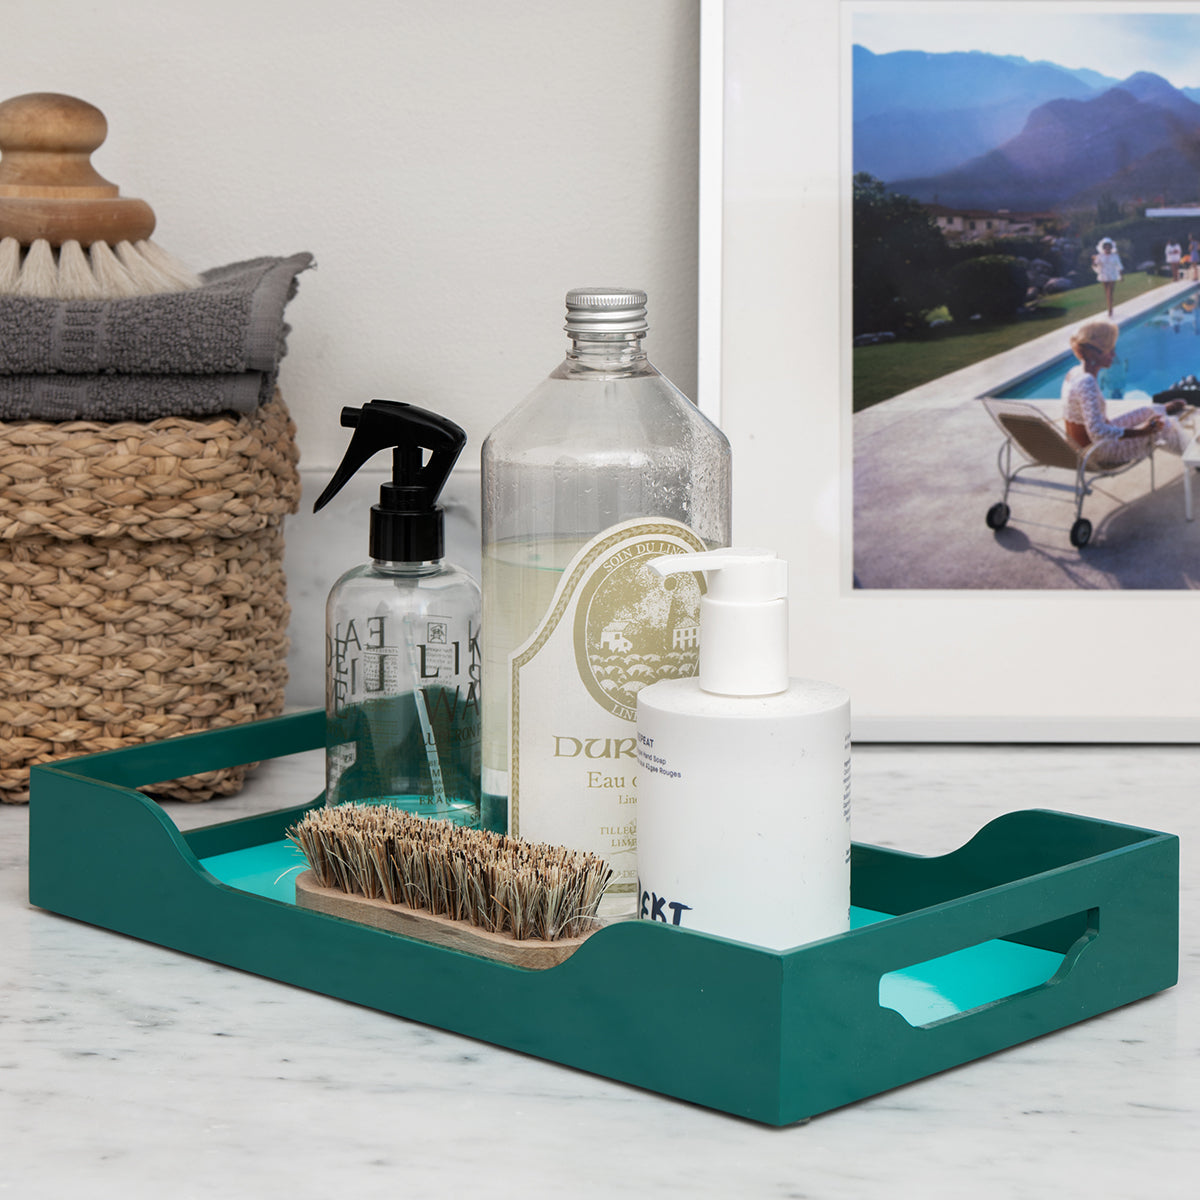 Printworks: Swell Lacquered Tray M - Turquoise